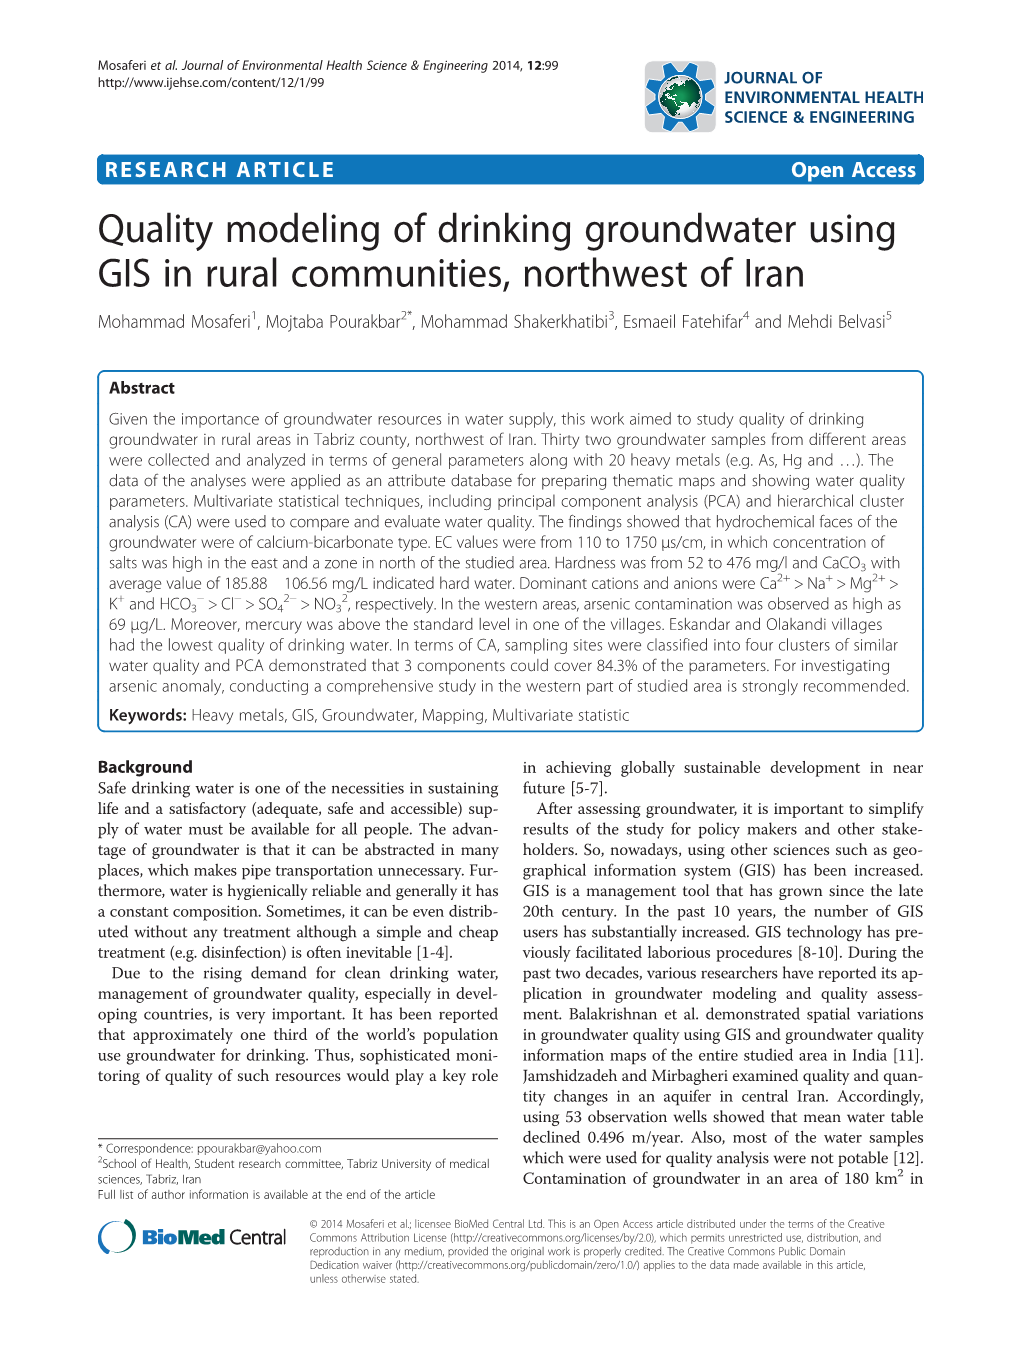 Quality Modeling of Drinking Groundwater Using GIS in Rural